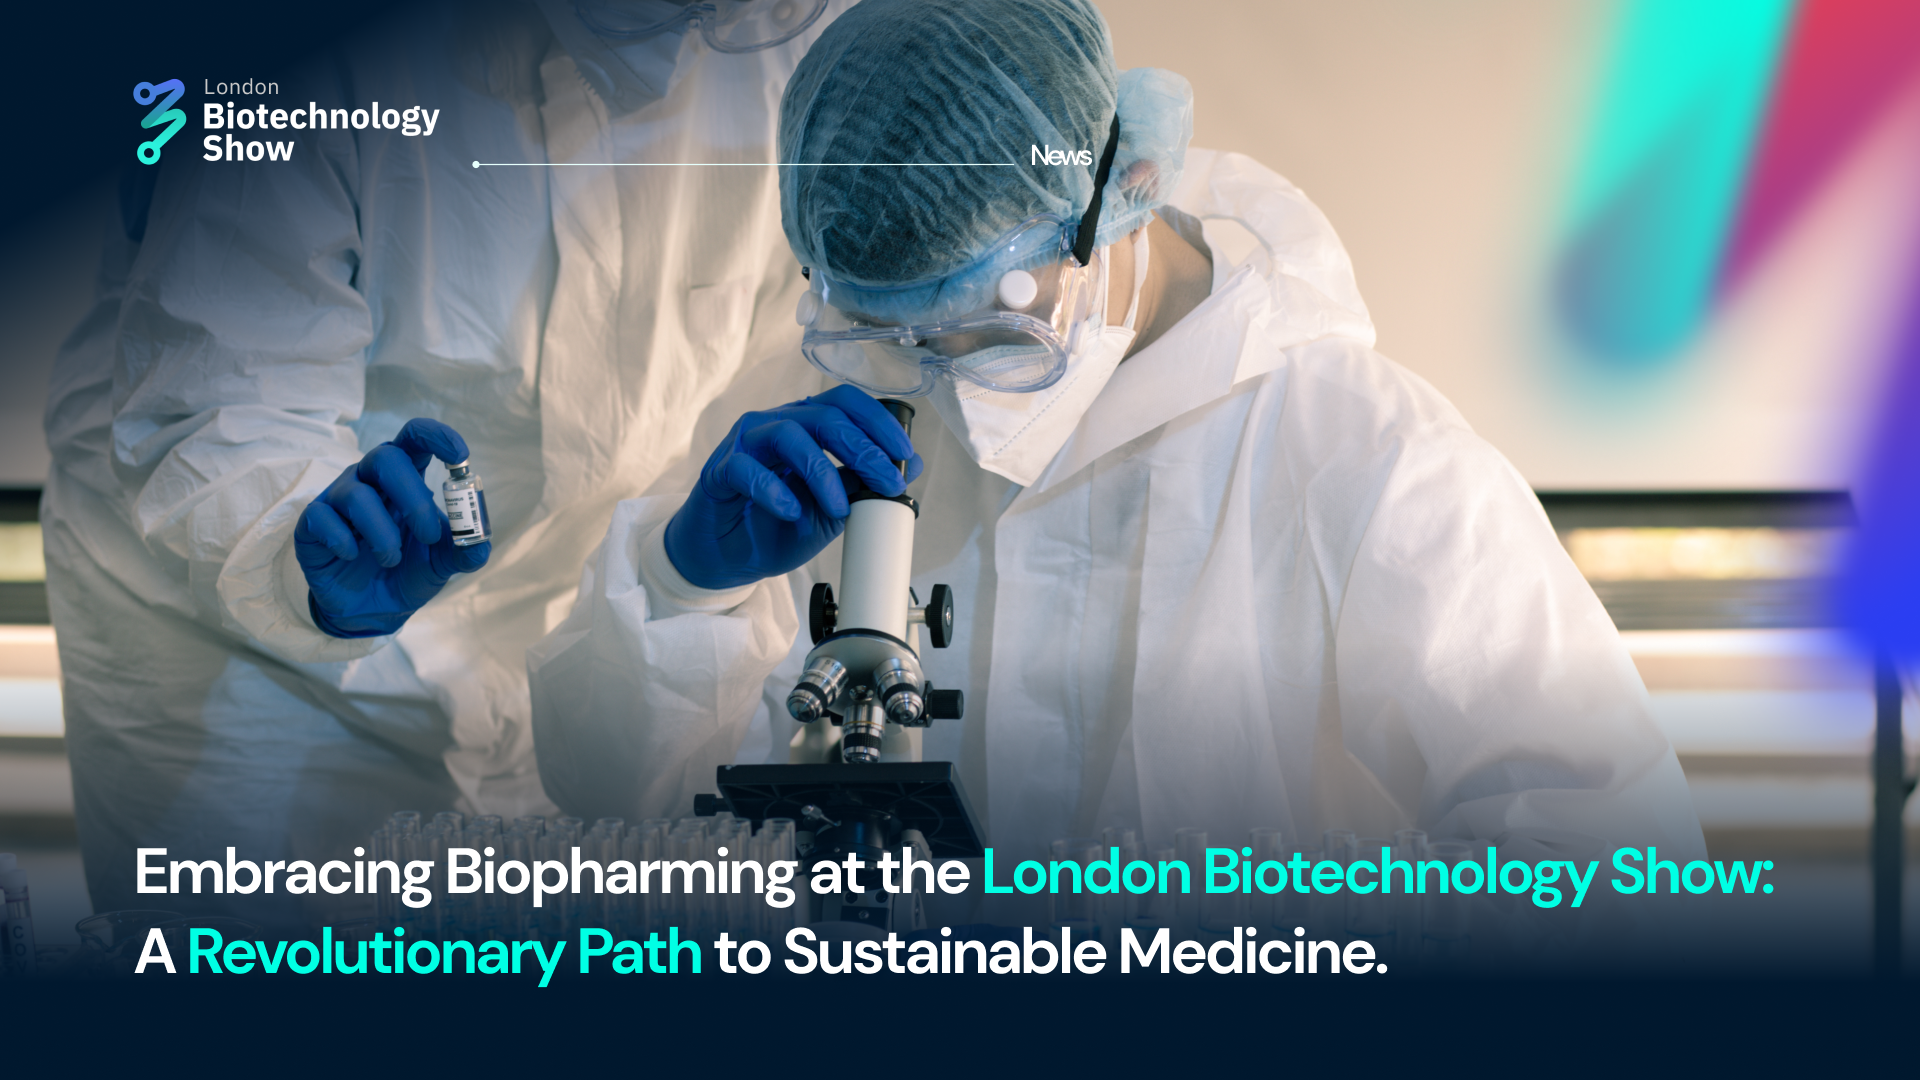 Embracing Biopharming at the London Biotechnology Show: A Revolutionary Path to Sustainable Medicine